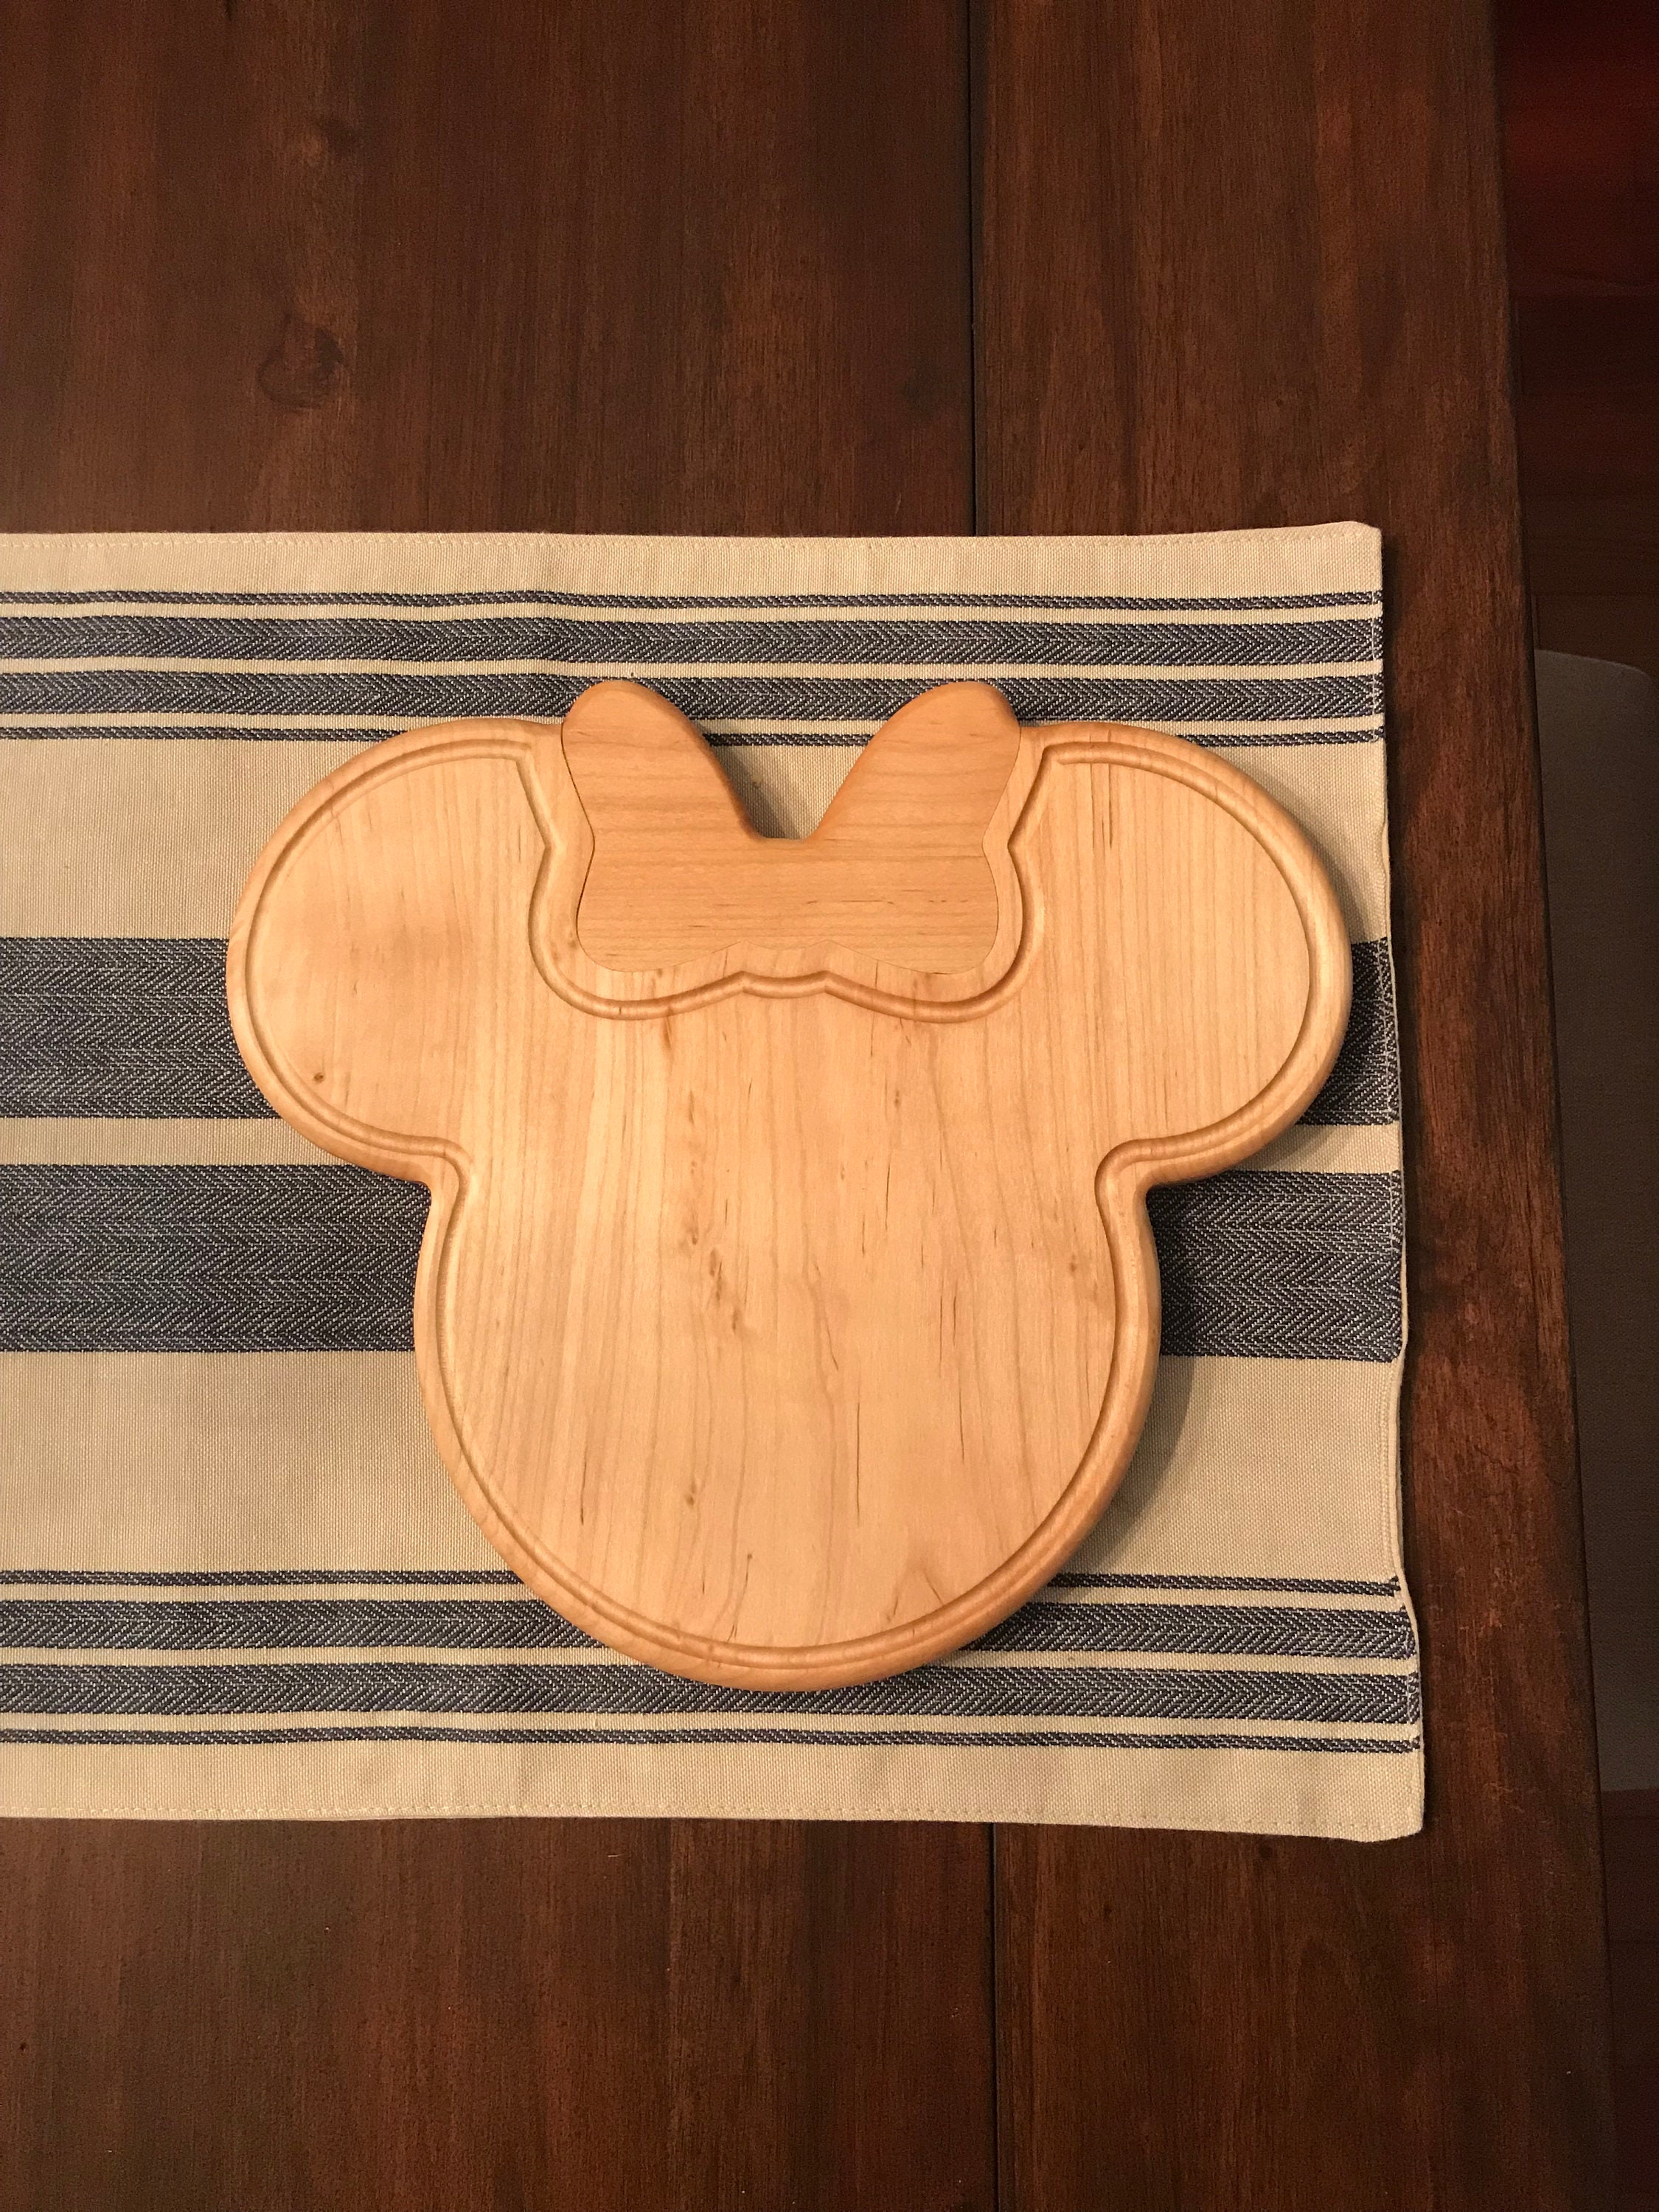 Mickey Mouse and Friends Cutting Board